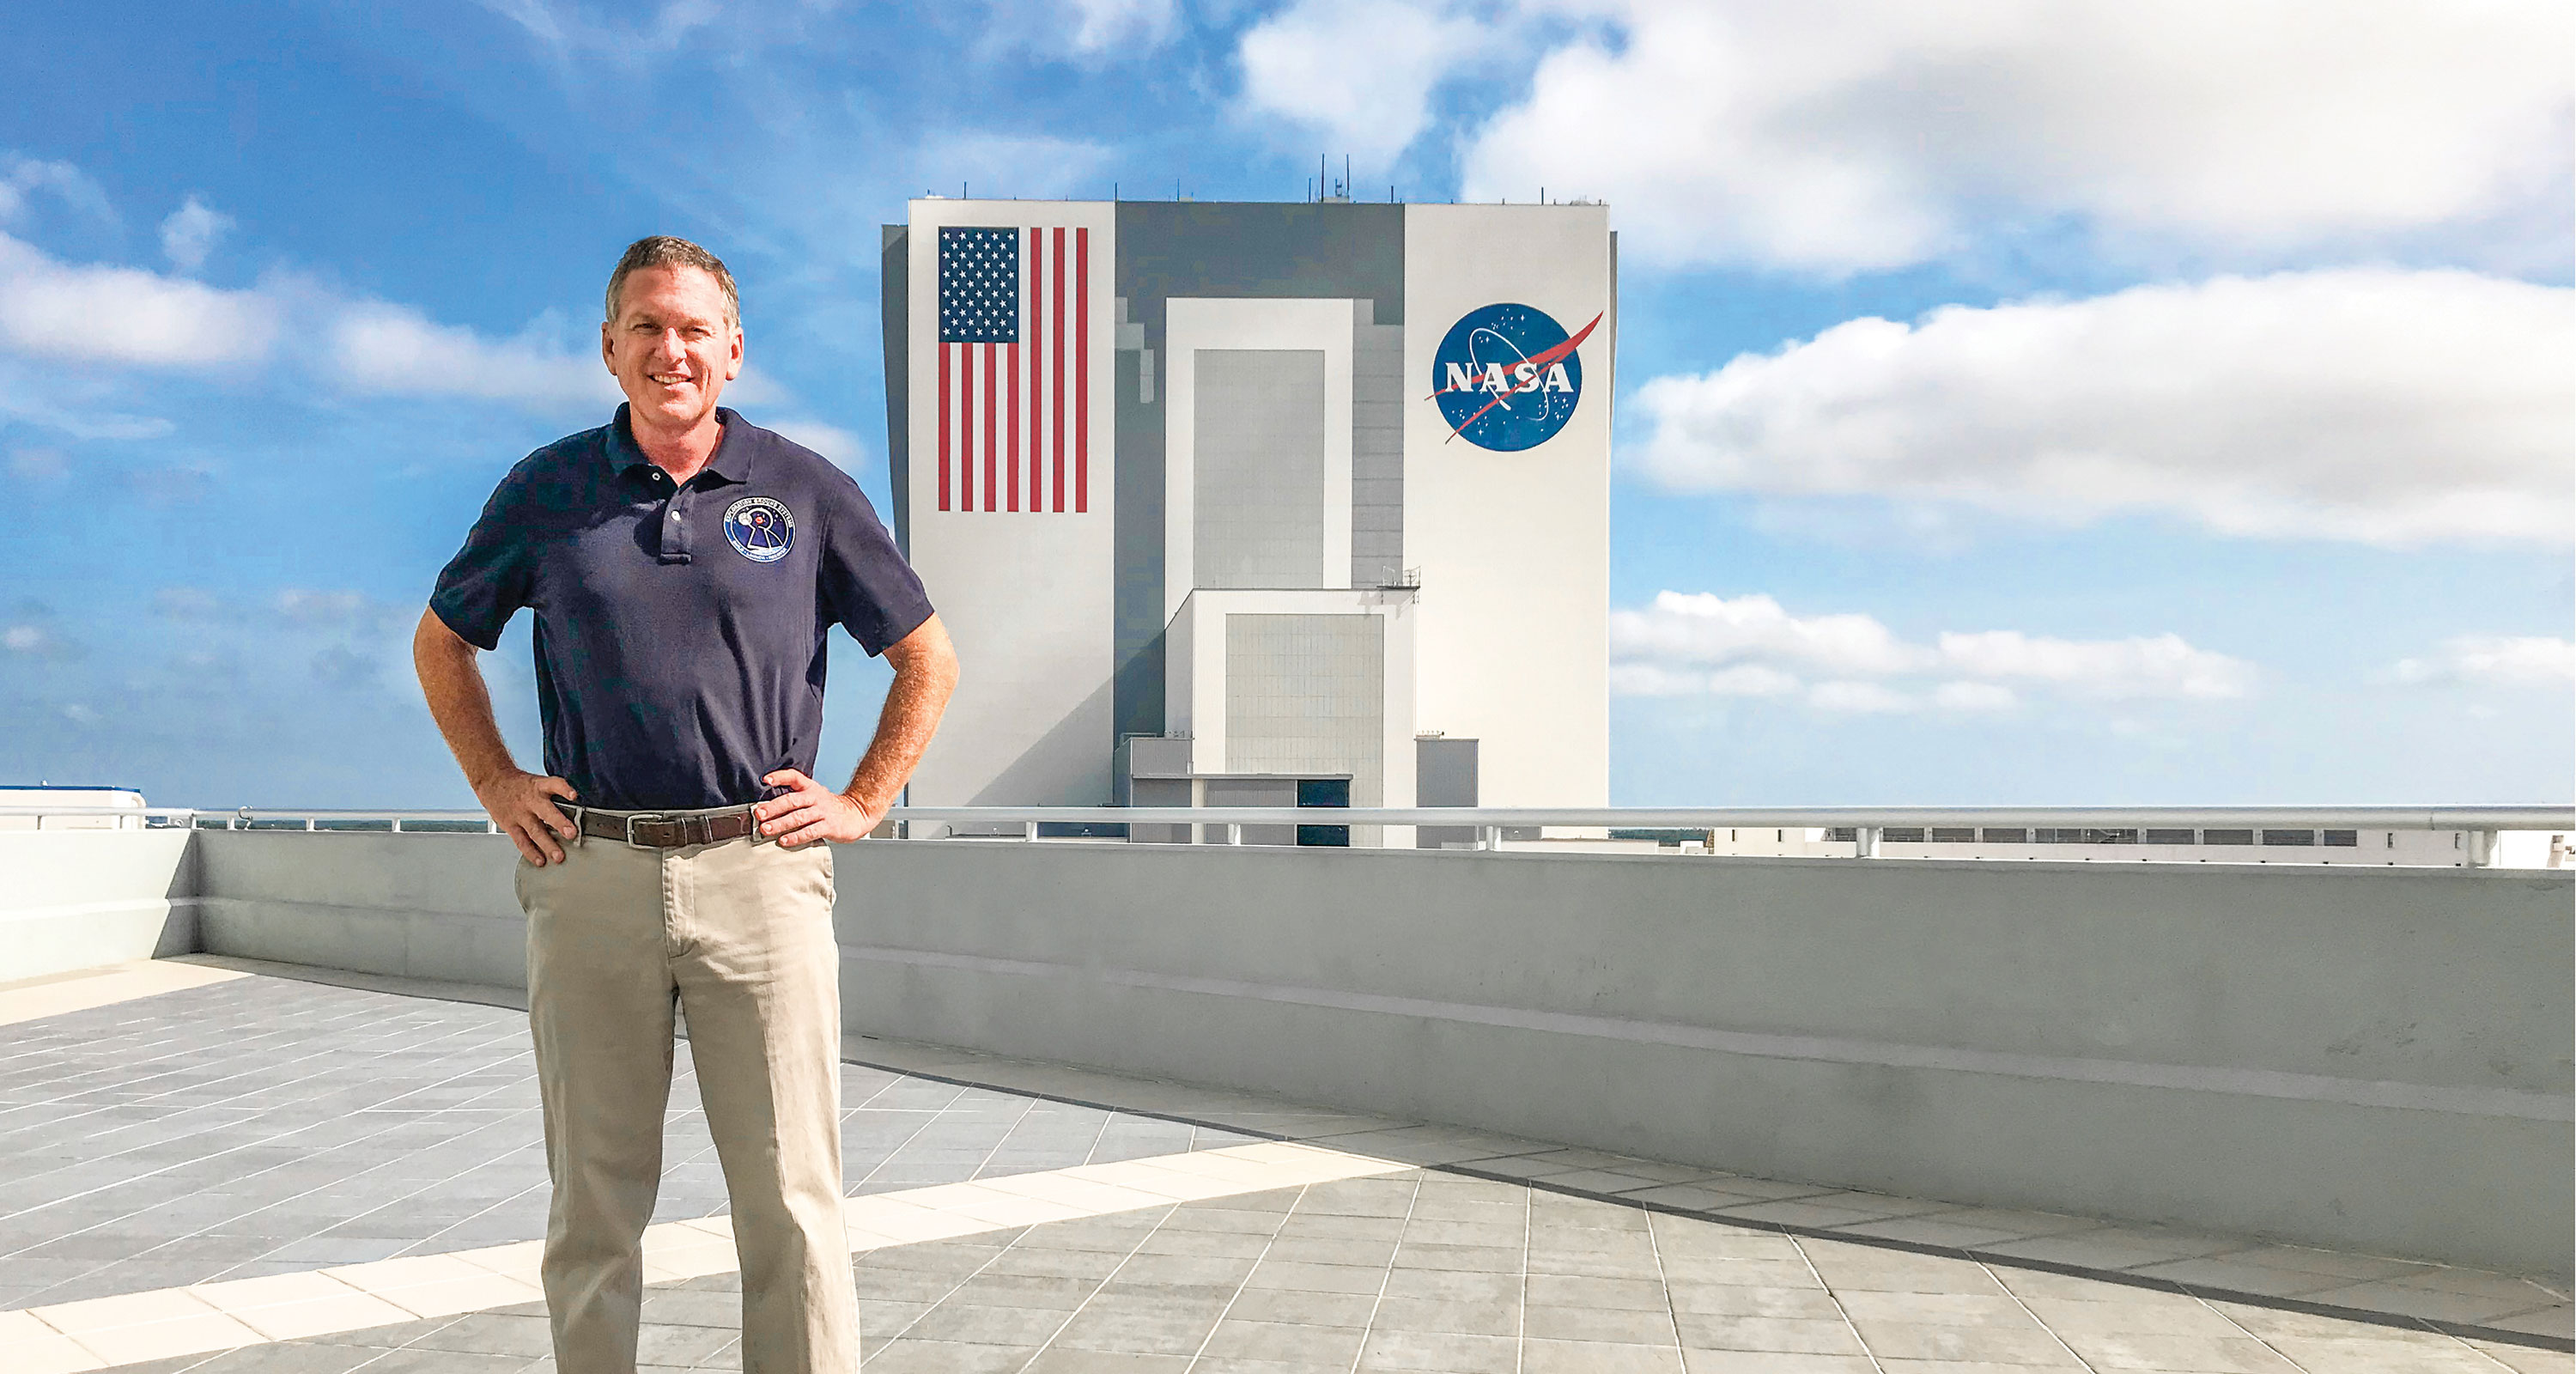 Professor Mike Bolger standing in front of the NASA command center